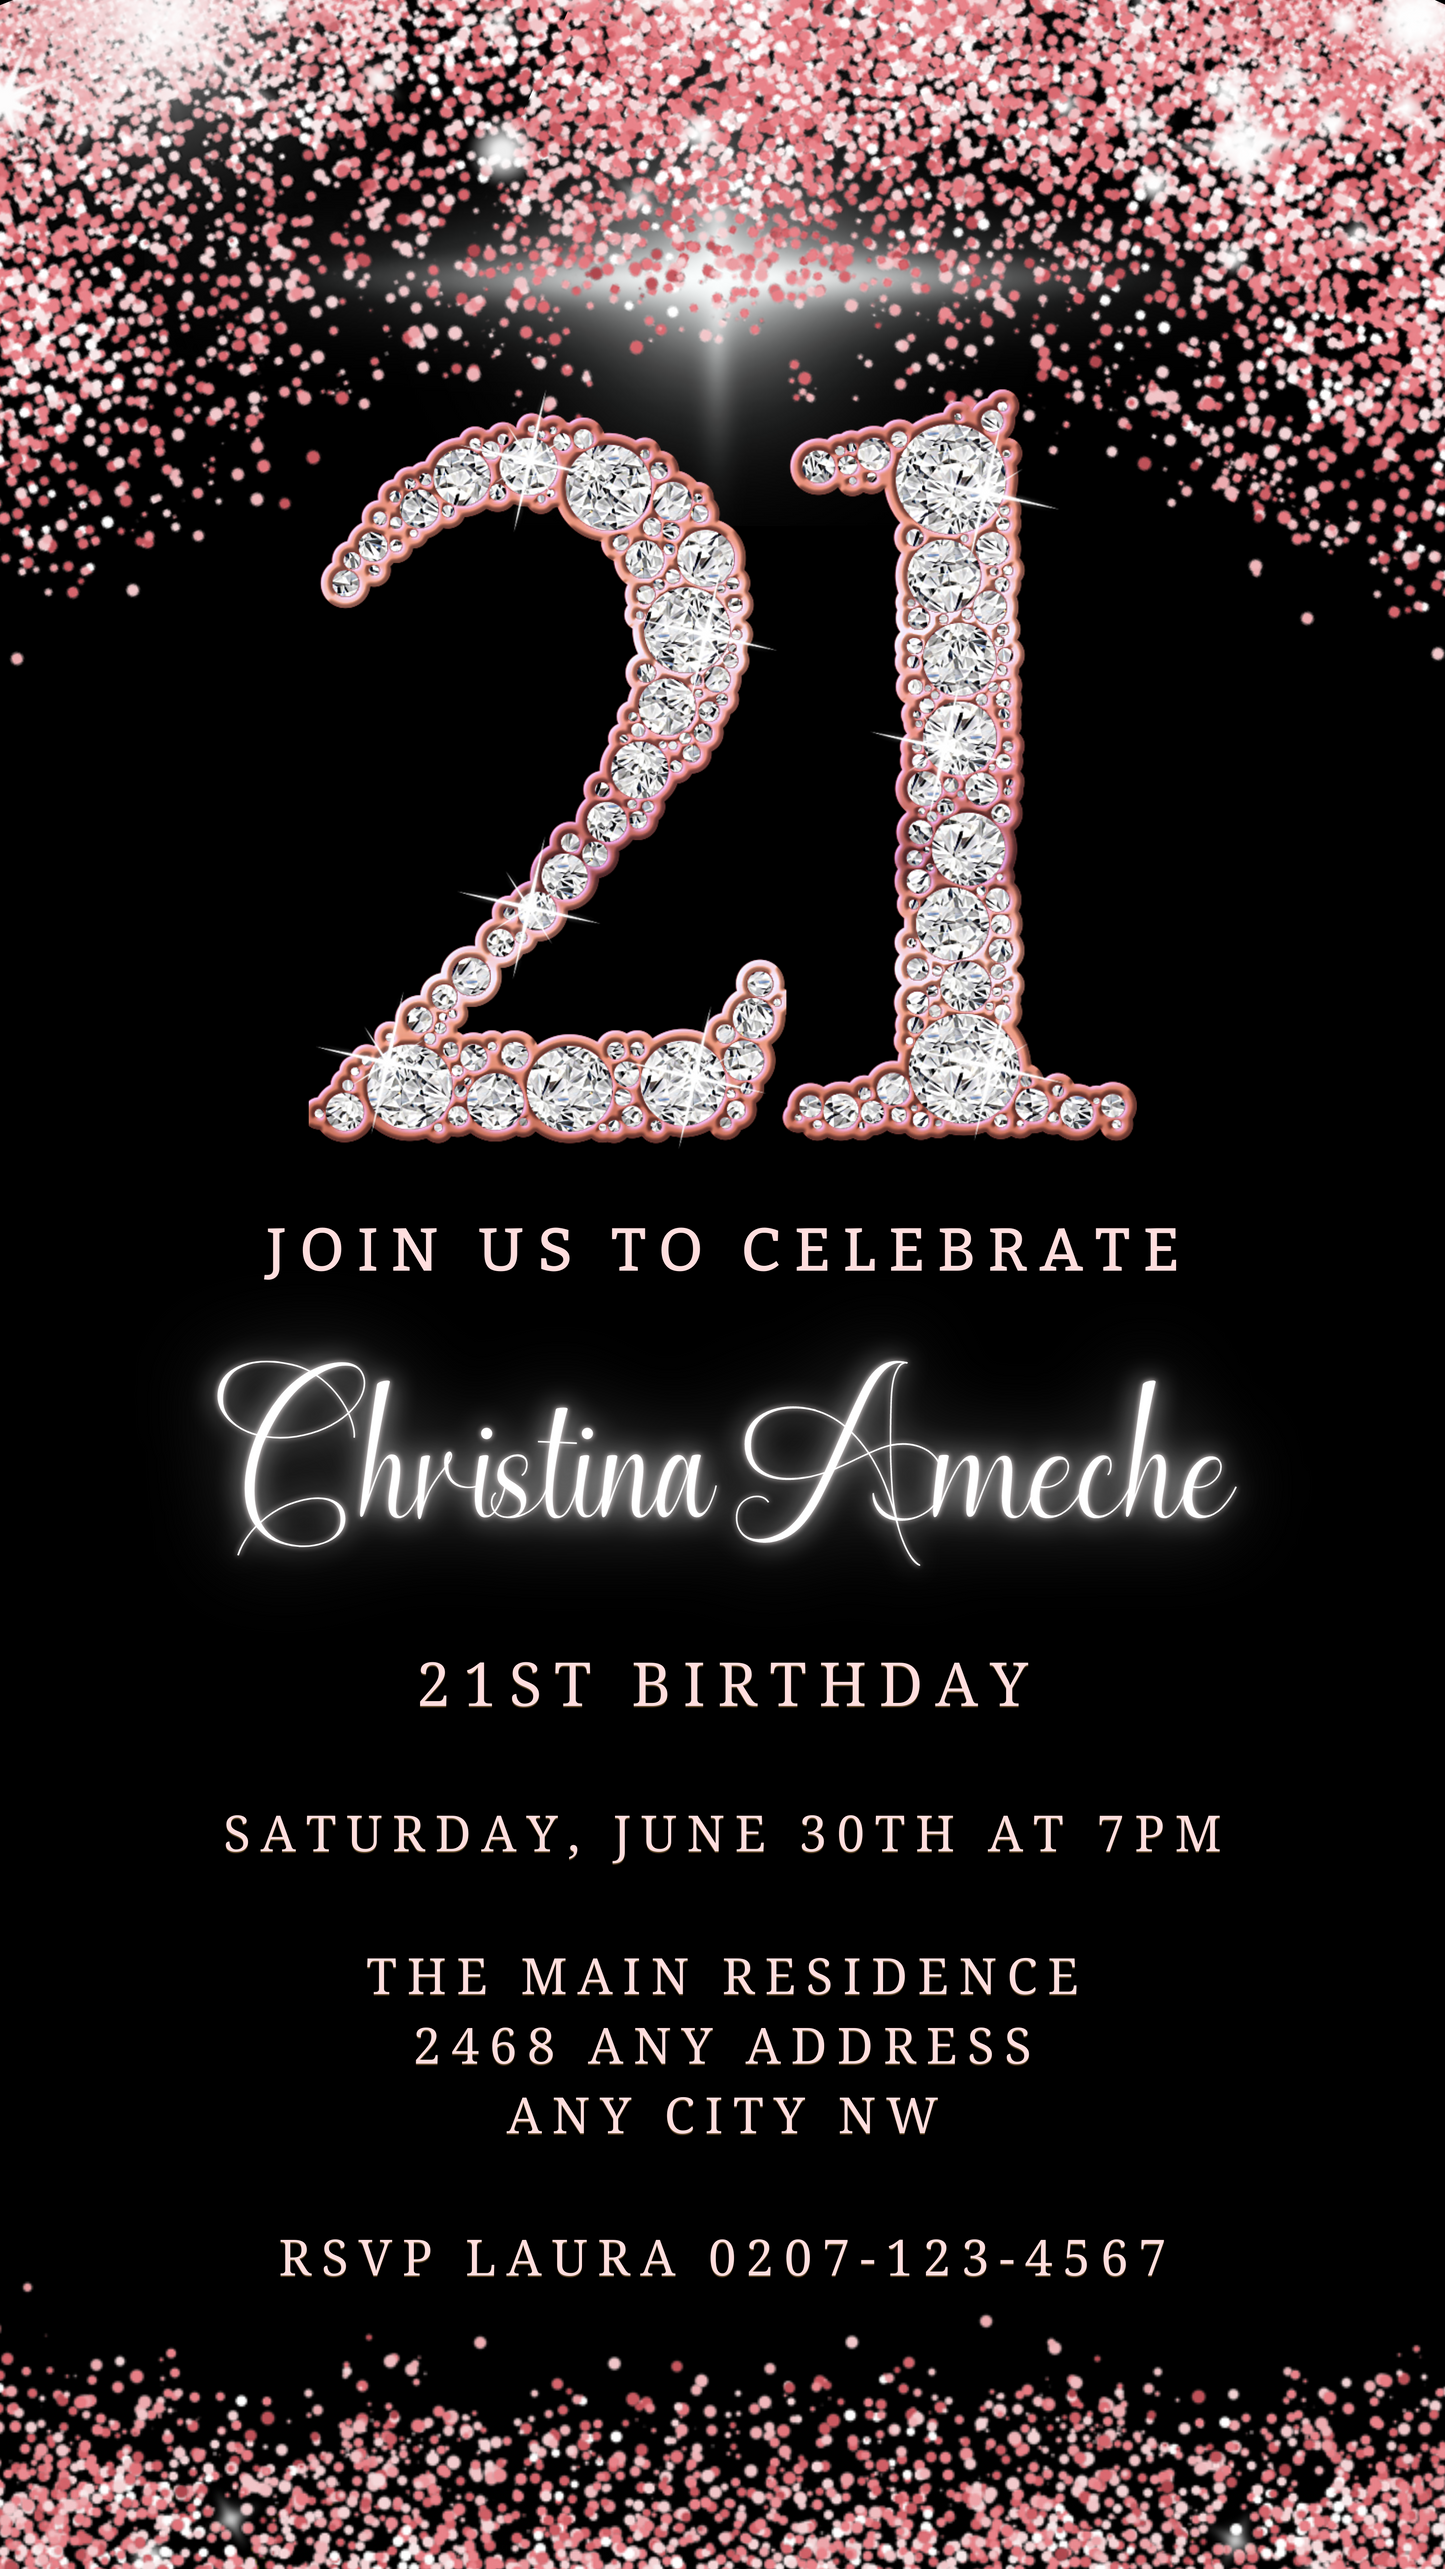 Rose Gold Glitter Diamond 21st Birthday Evite featuring white text on black and gold background, customizable via Canva for digital sharing.